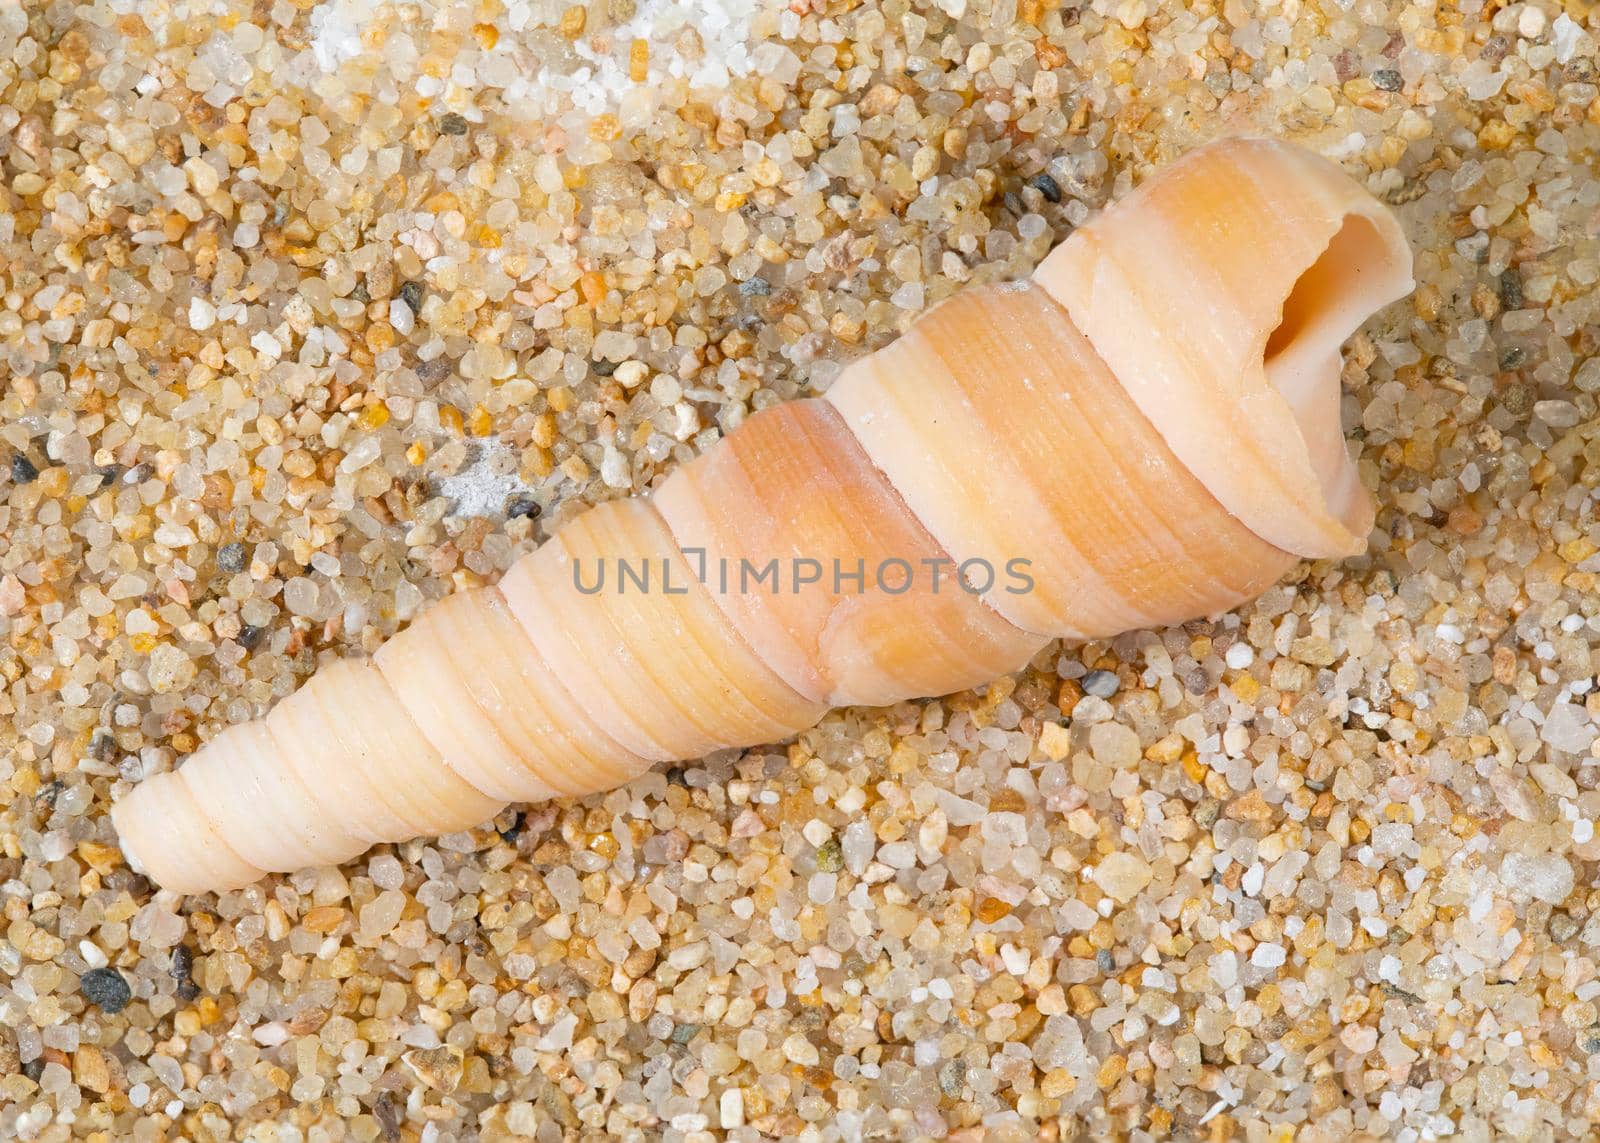 Overhead view of a snail's spiral seashell lying on sand.